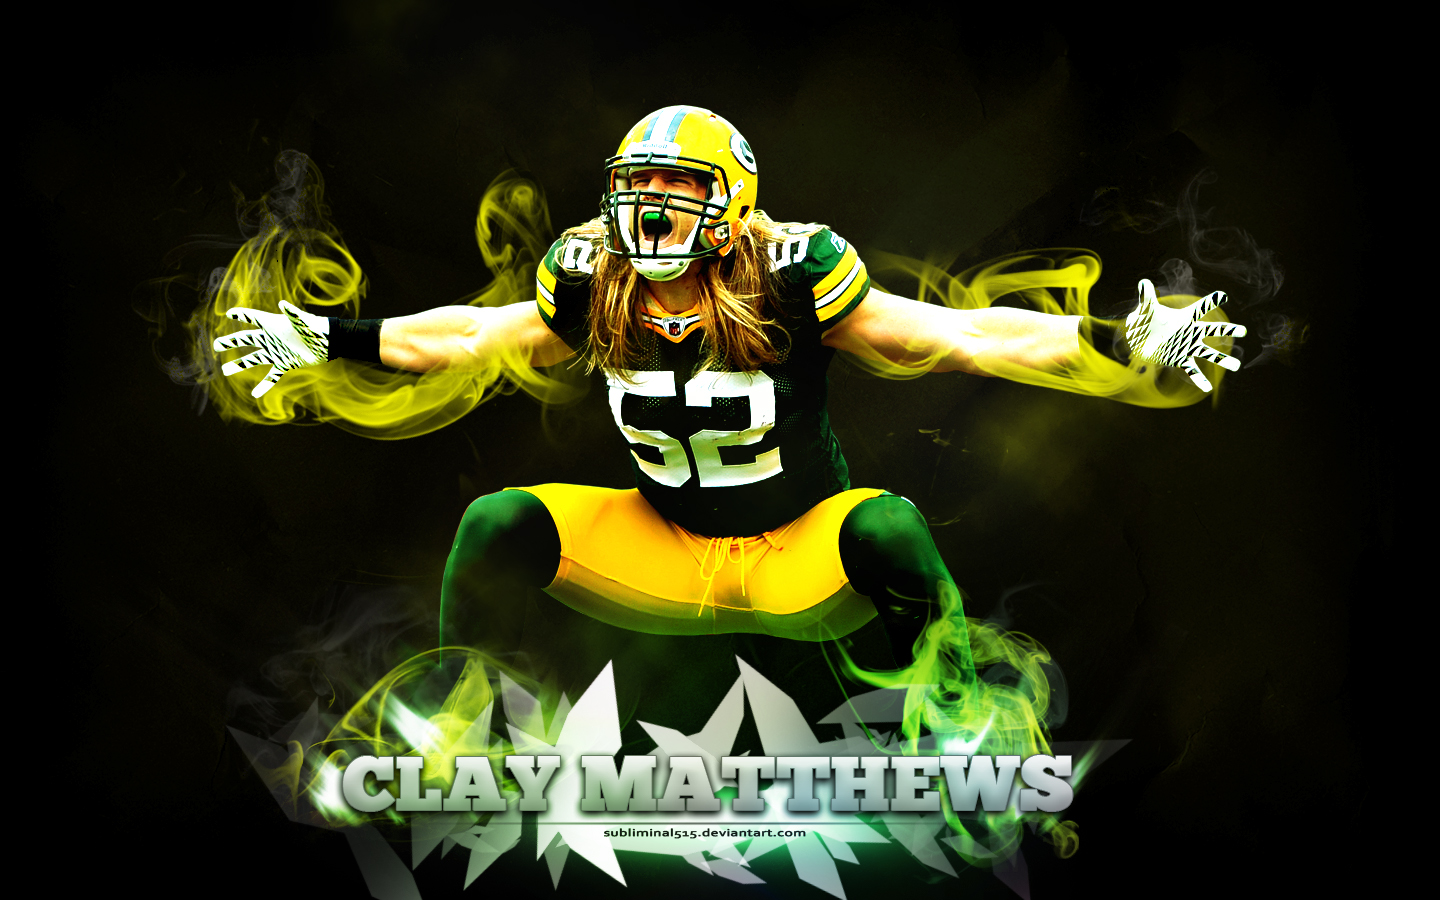  jpeg 780kB Green Bay Packers HD images Green Bay Packers wallpapers